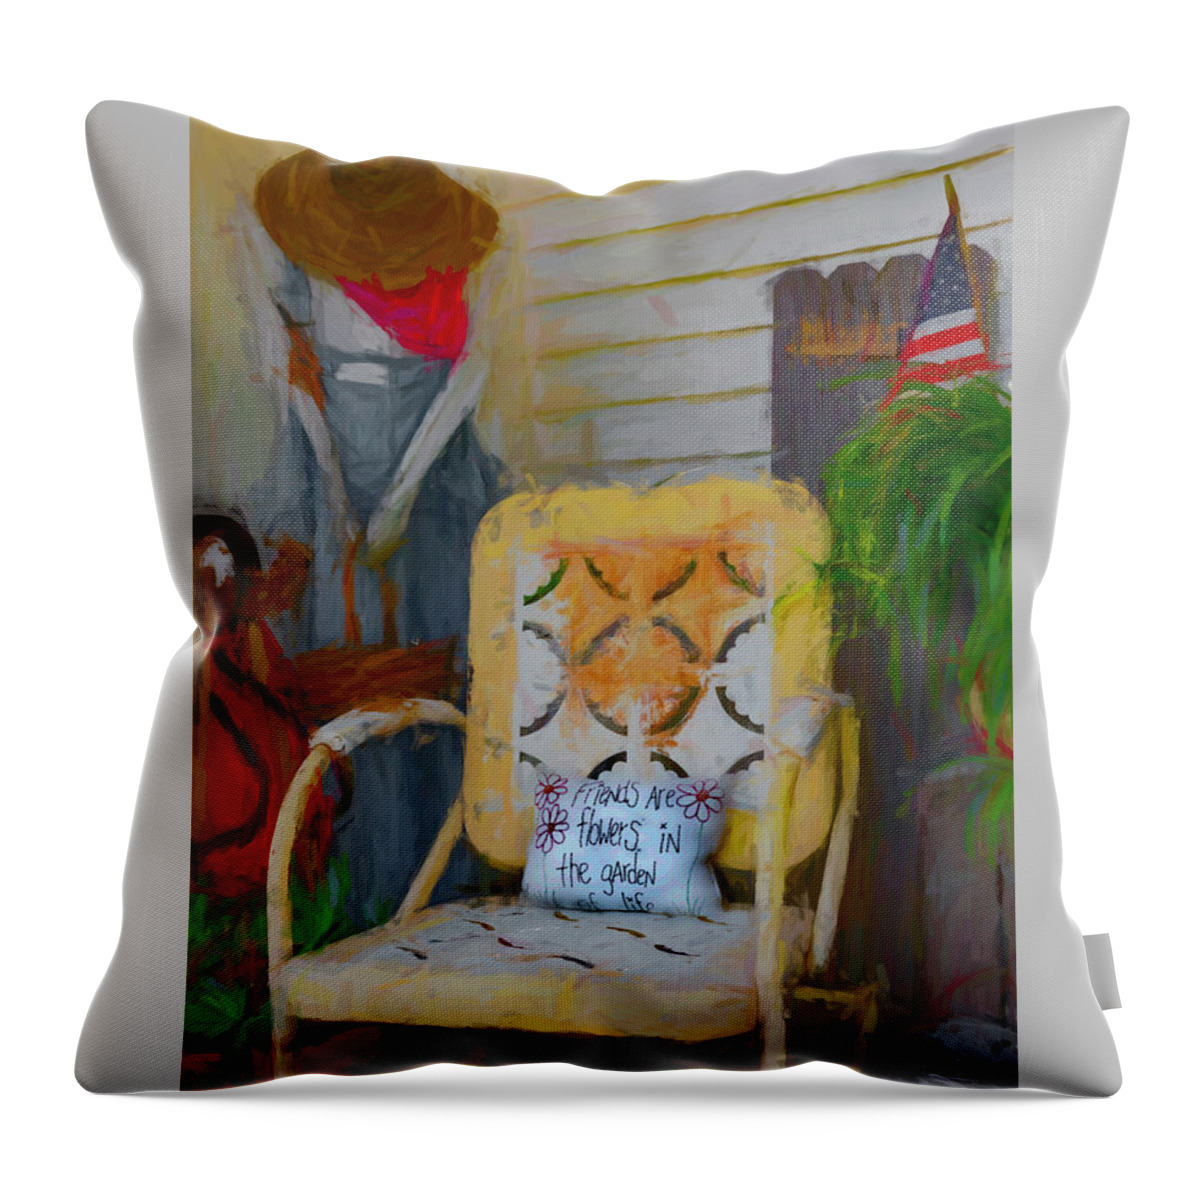 Antiques Throw Pillow featuring the digital art One Mans Trash 2 by Barry Wills